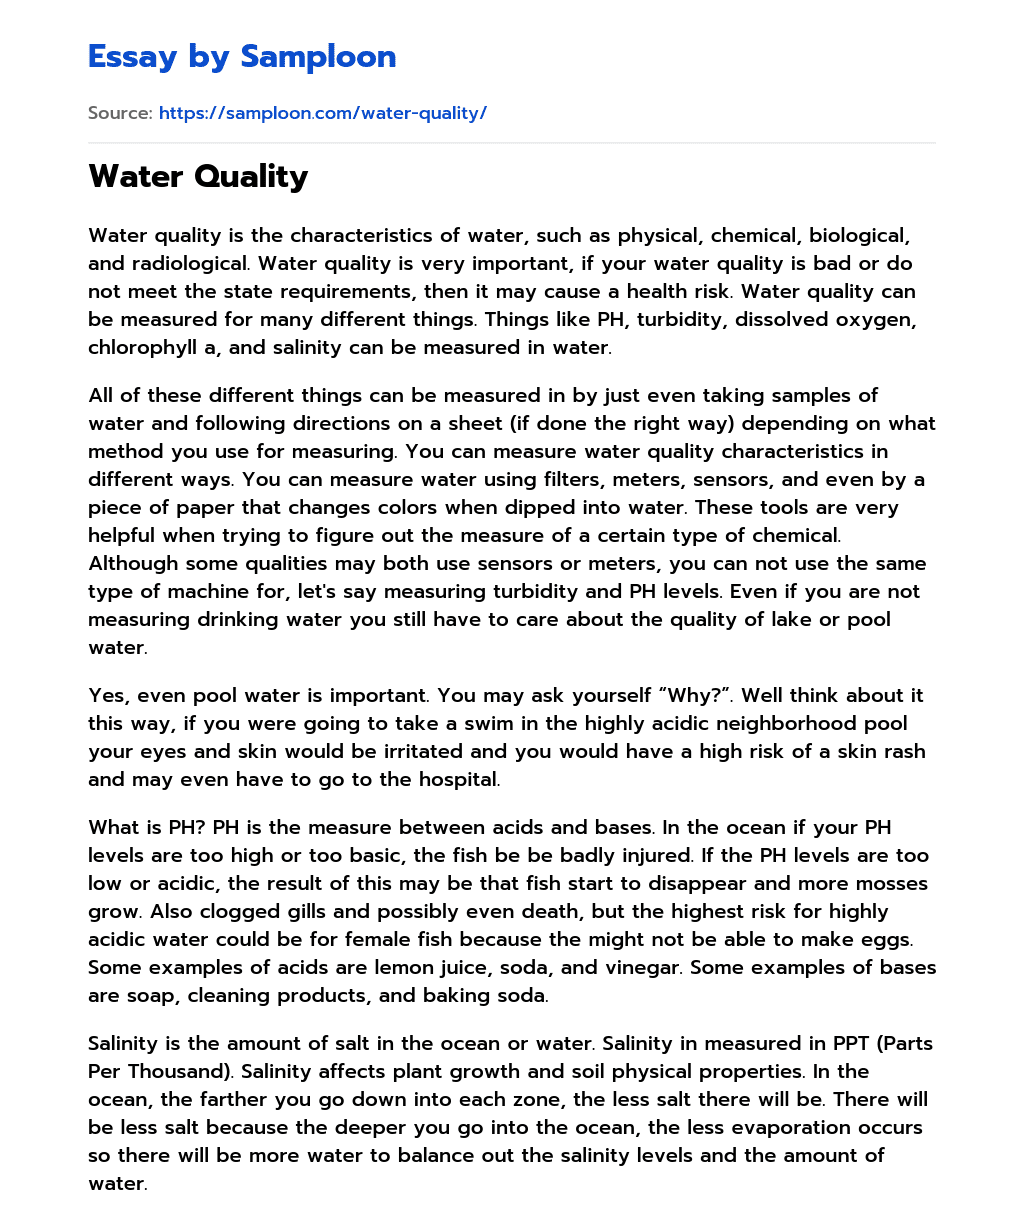 Water Quality essay